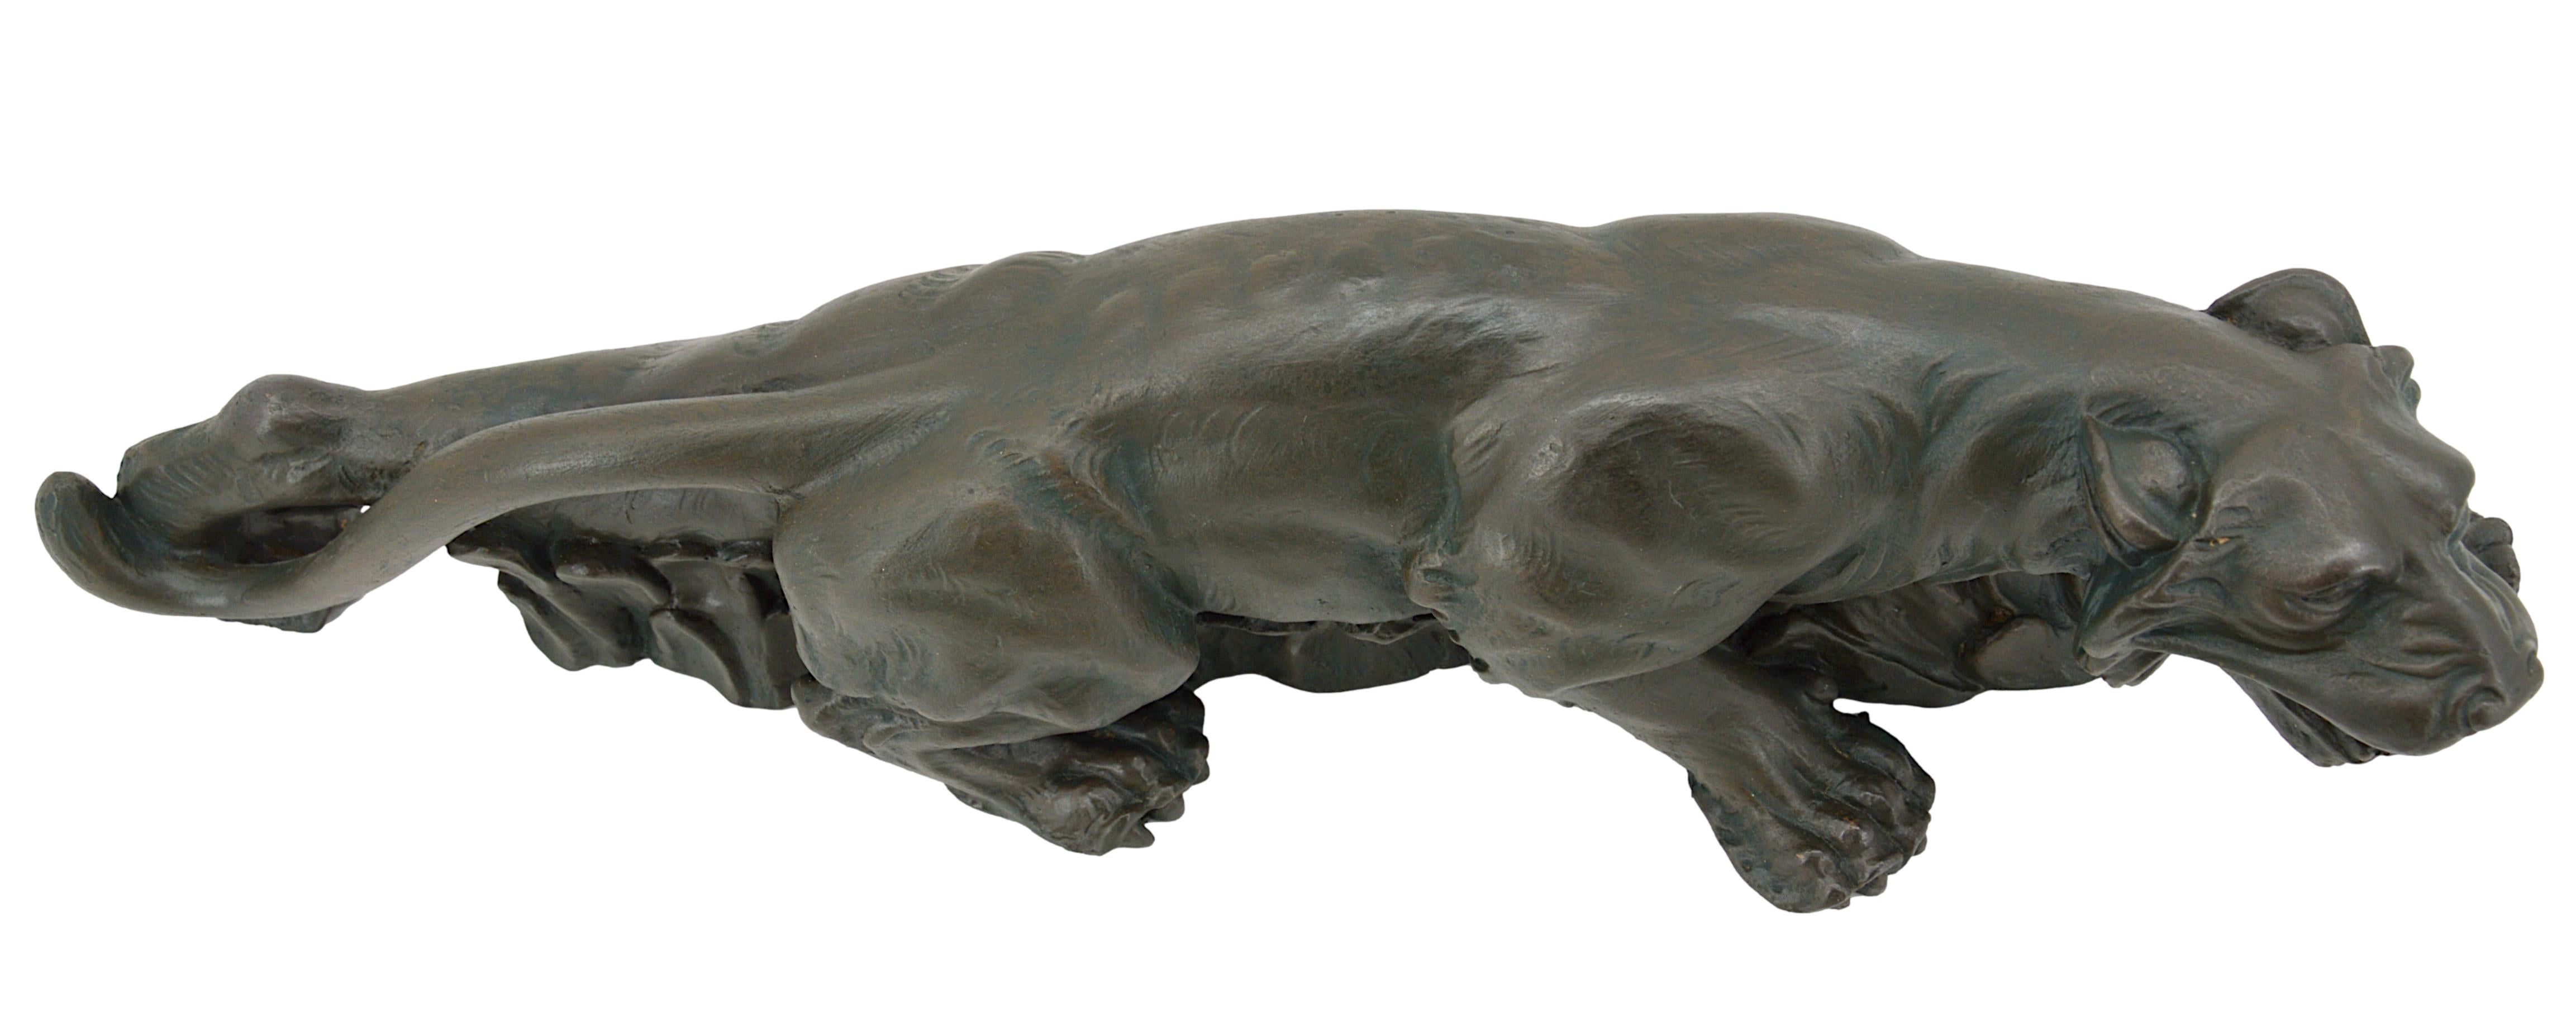 French Art Deco Tiger on the Prowl Sculpture, 1930s For Sale 2